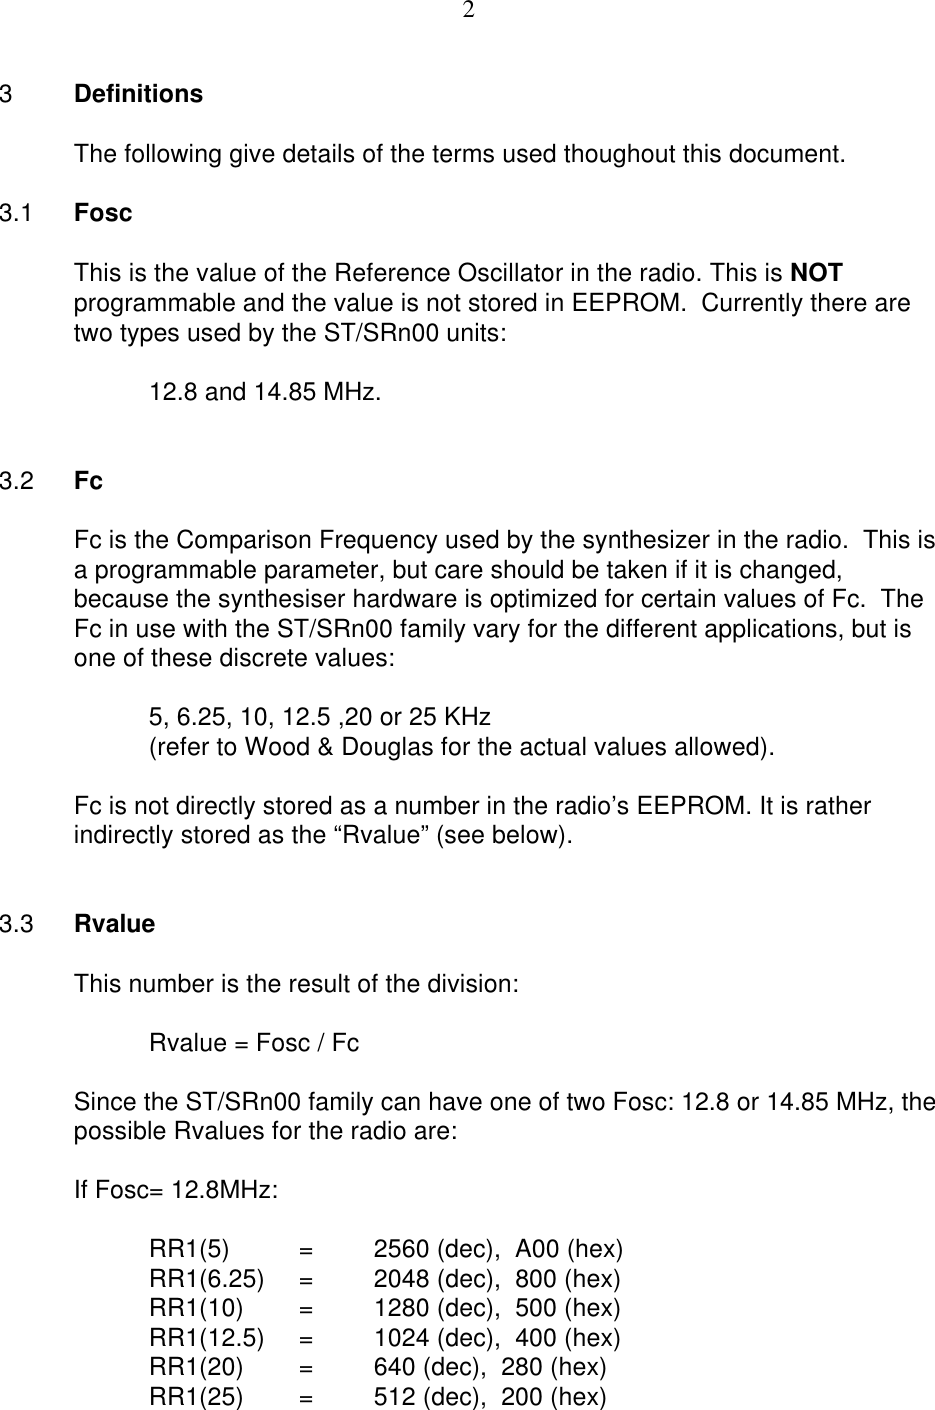 23DefinitionsThe following give details of the terms used thoughout this document.3.1 FoscThis is the value of the Reference Oscillator in the radio. This is NOTprogrammable and the value is not stored in EEPROM.  Currently there aretwo types used by the ST/SRn00 units:12.8 and 14.85 MHz.3.2 FcFc is the Comparison Frequency used by the synthesizer in the radio.  This isa programmable parameter, but care should be taken if it is changed,because the synthesiser hardware is optimized for certain values of Fc.  TheFc in use with the ST/SRn00 family vary for the different applications, but isone of these discrete values:5, 6.25, 10, 12.5 ,20 or 25 KHz (refer to Wood &amp; Douglas for the actual values allowed).Fc is not directly stored as a number in the radio’s EEPROM. It is ratherindirectly stored as the “Rvalue” (see below).3.3 RvalueThis number is the result of the division:Rvalue = Fosc / FcSince the ST/SRn00 family can have one of two Fosc: 12.8 or 14.85 MHz, thepossible Rvalues for the radio are:If Fosc= 12.8MHz:RR1(5) =2560 (dec),  A00 (hex)RR1(6.25)  =2048 (dec),  800 (hex)RR1(10) =1280 (dec),  500 (hex)RR1(12.5) =1024 (dec),  400 (hex)RR1(20)  =640 (dec),  280 (hex)RR1(25) =512 (dec),  200 (hex)